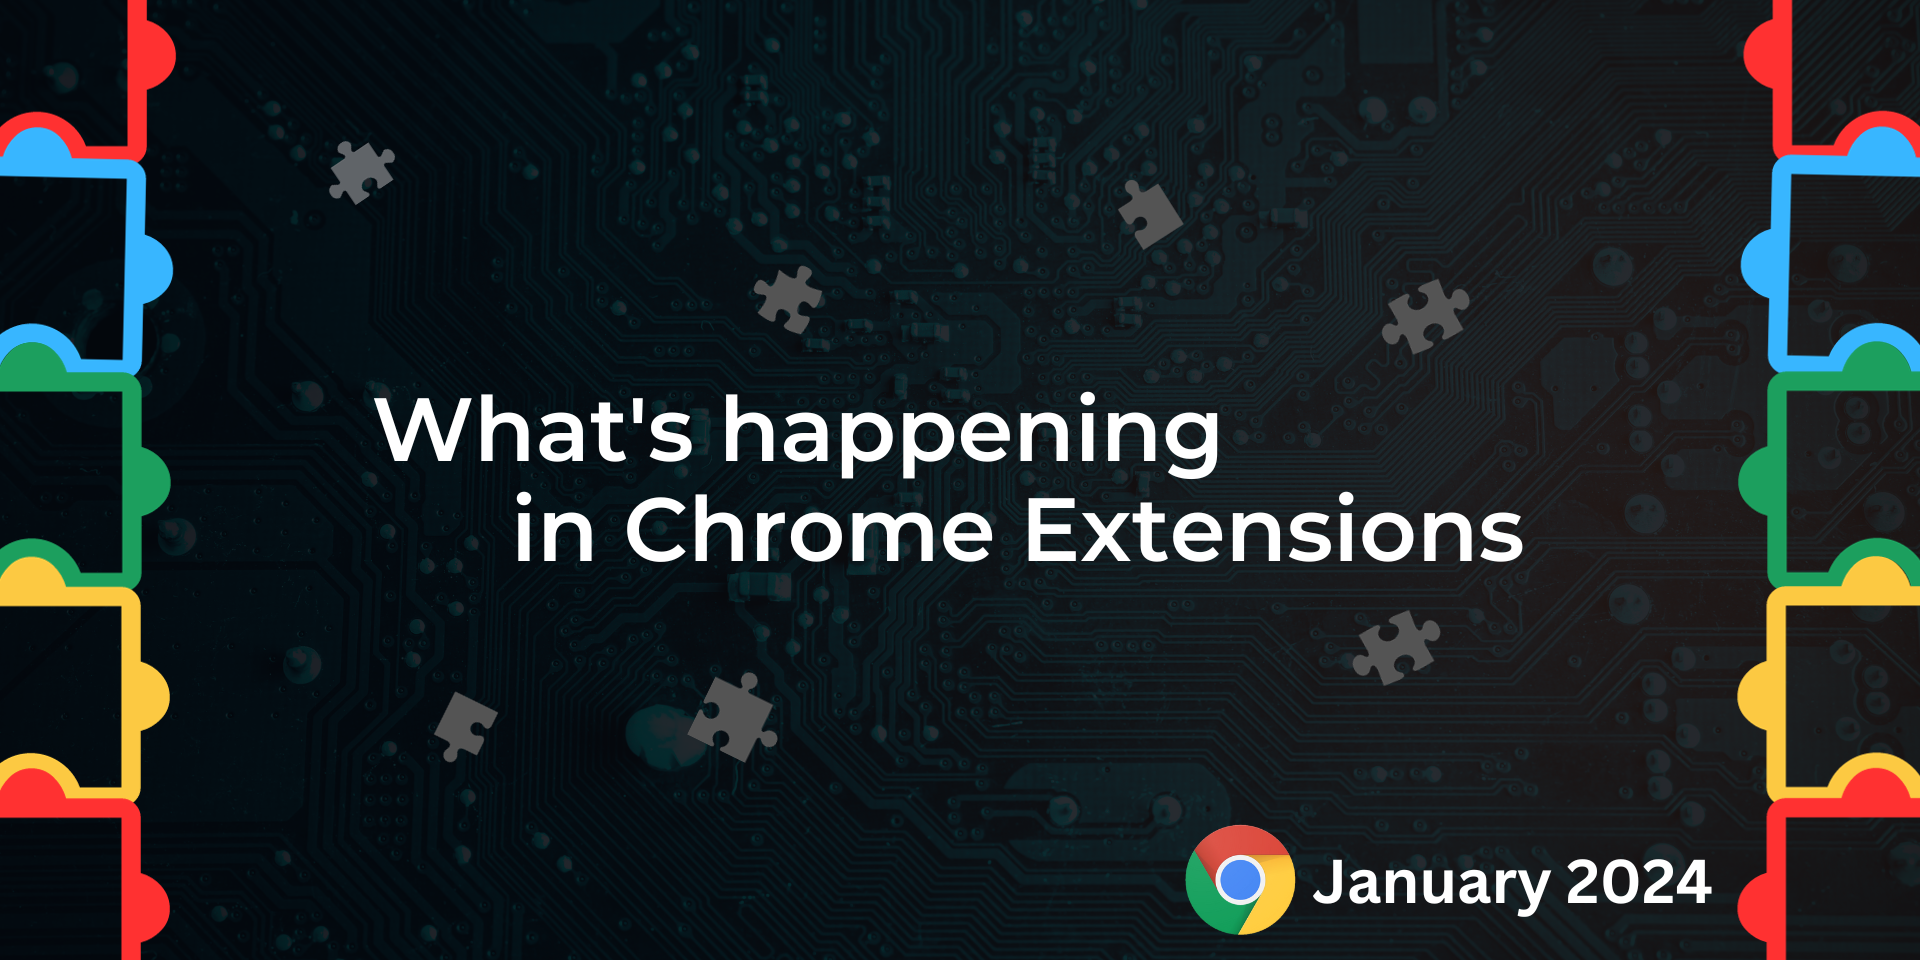 What are Google Chrome Extensions?